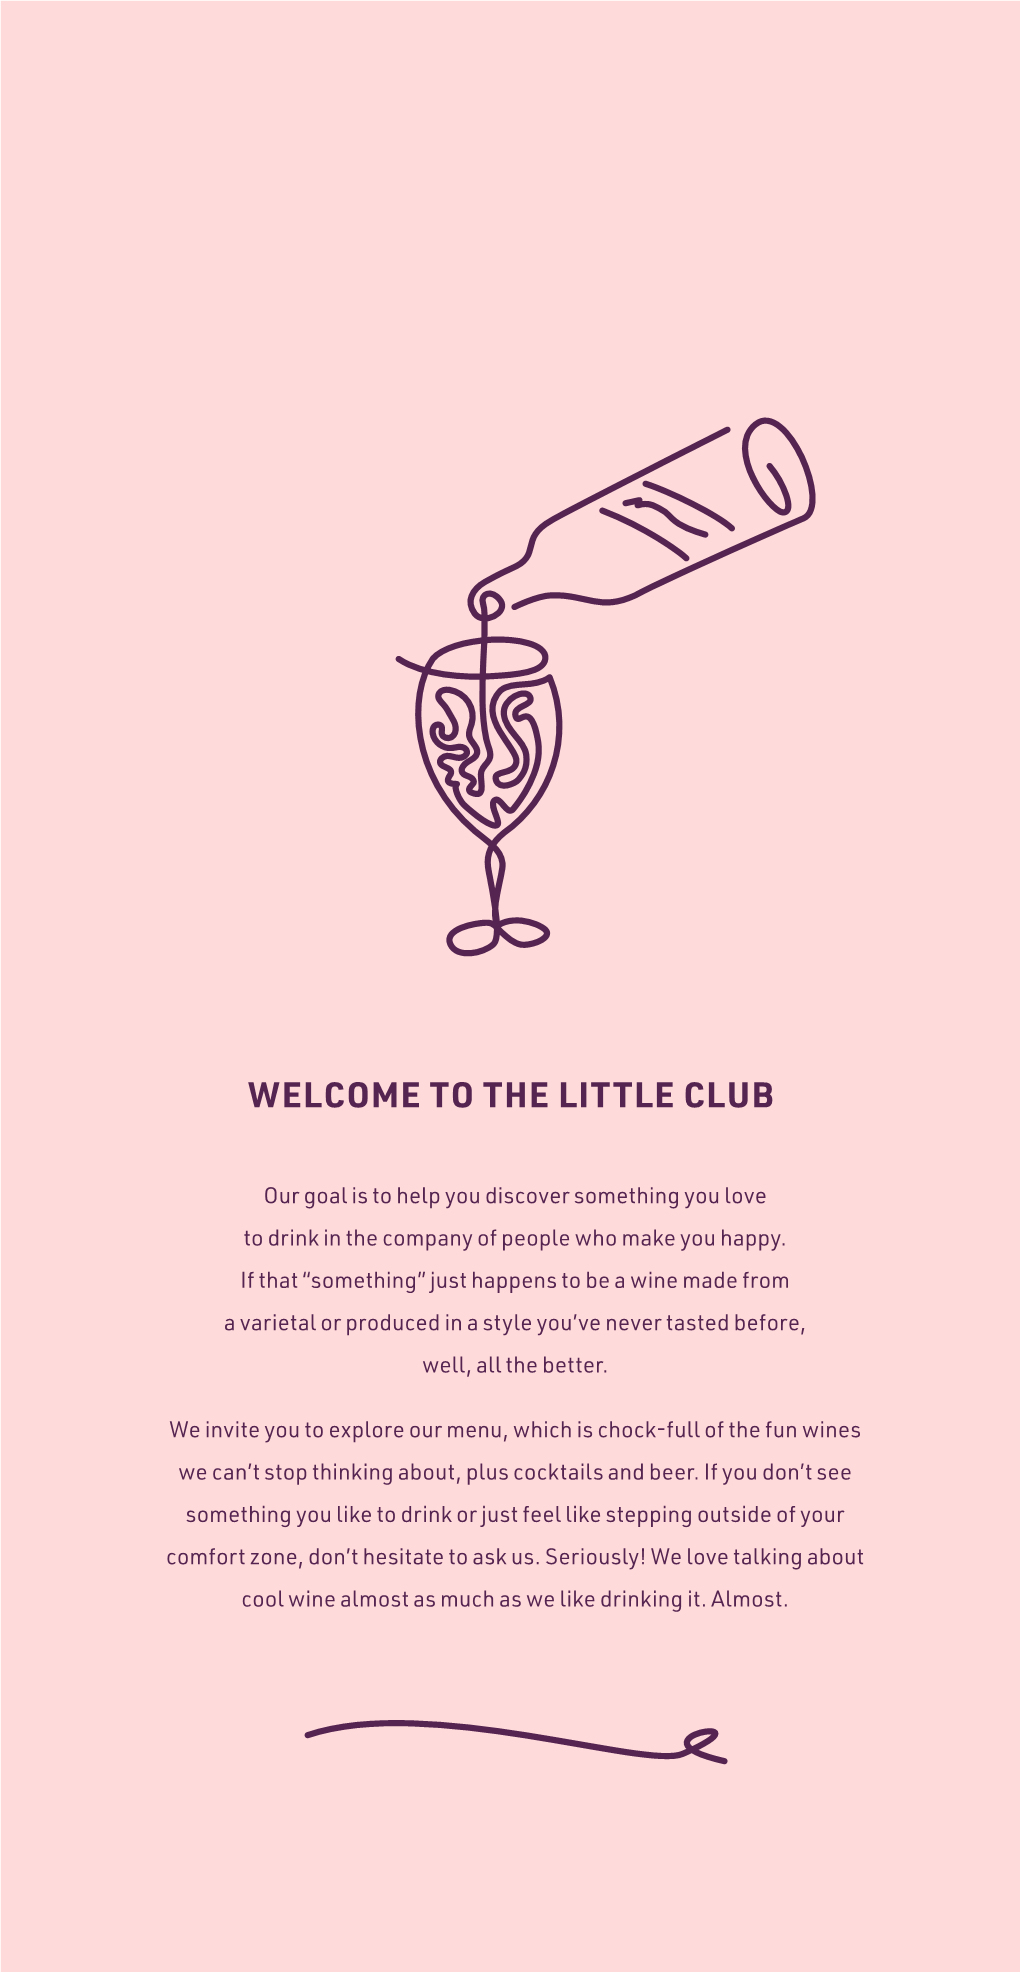 The Little Club